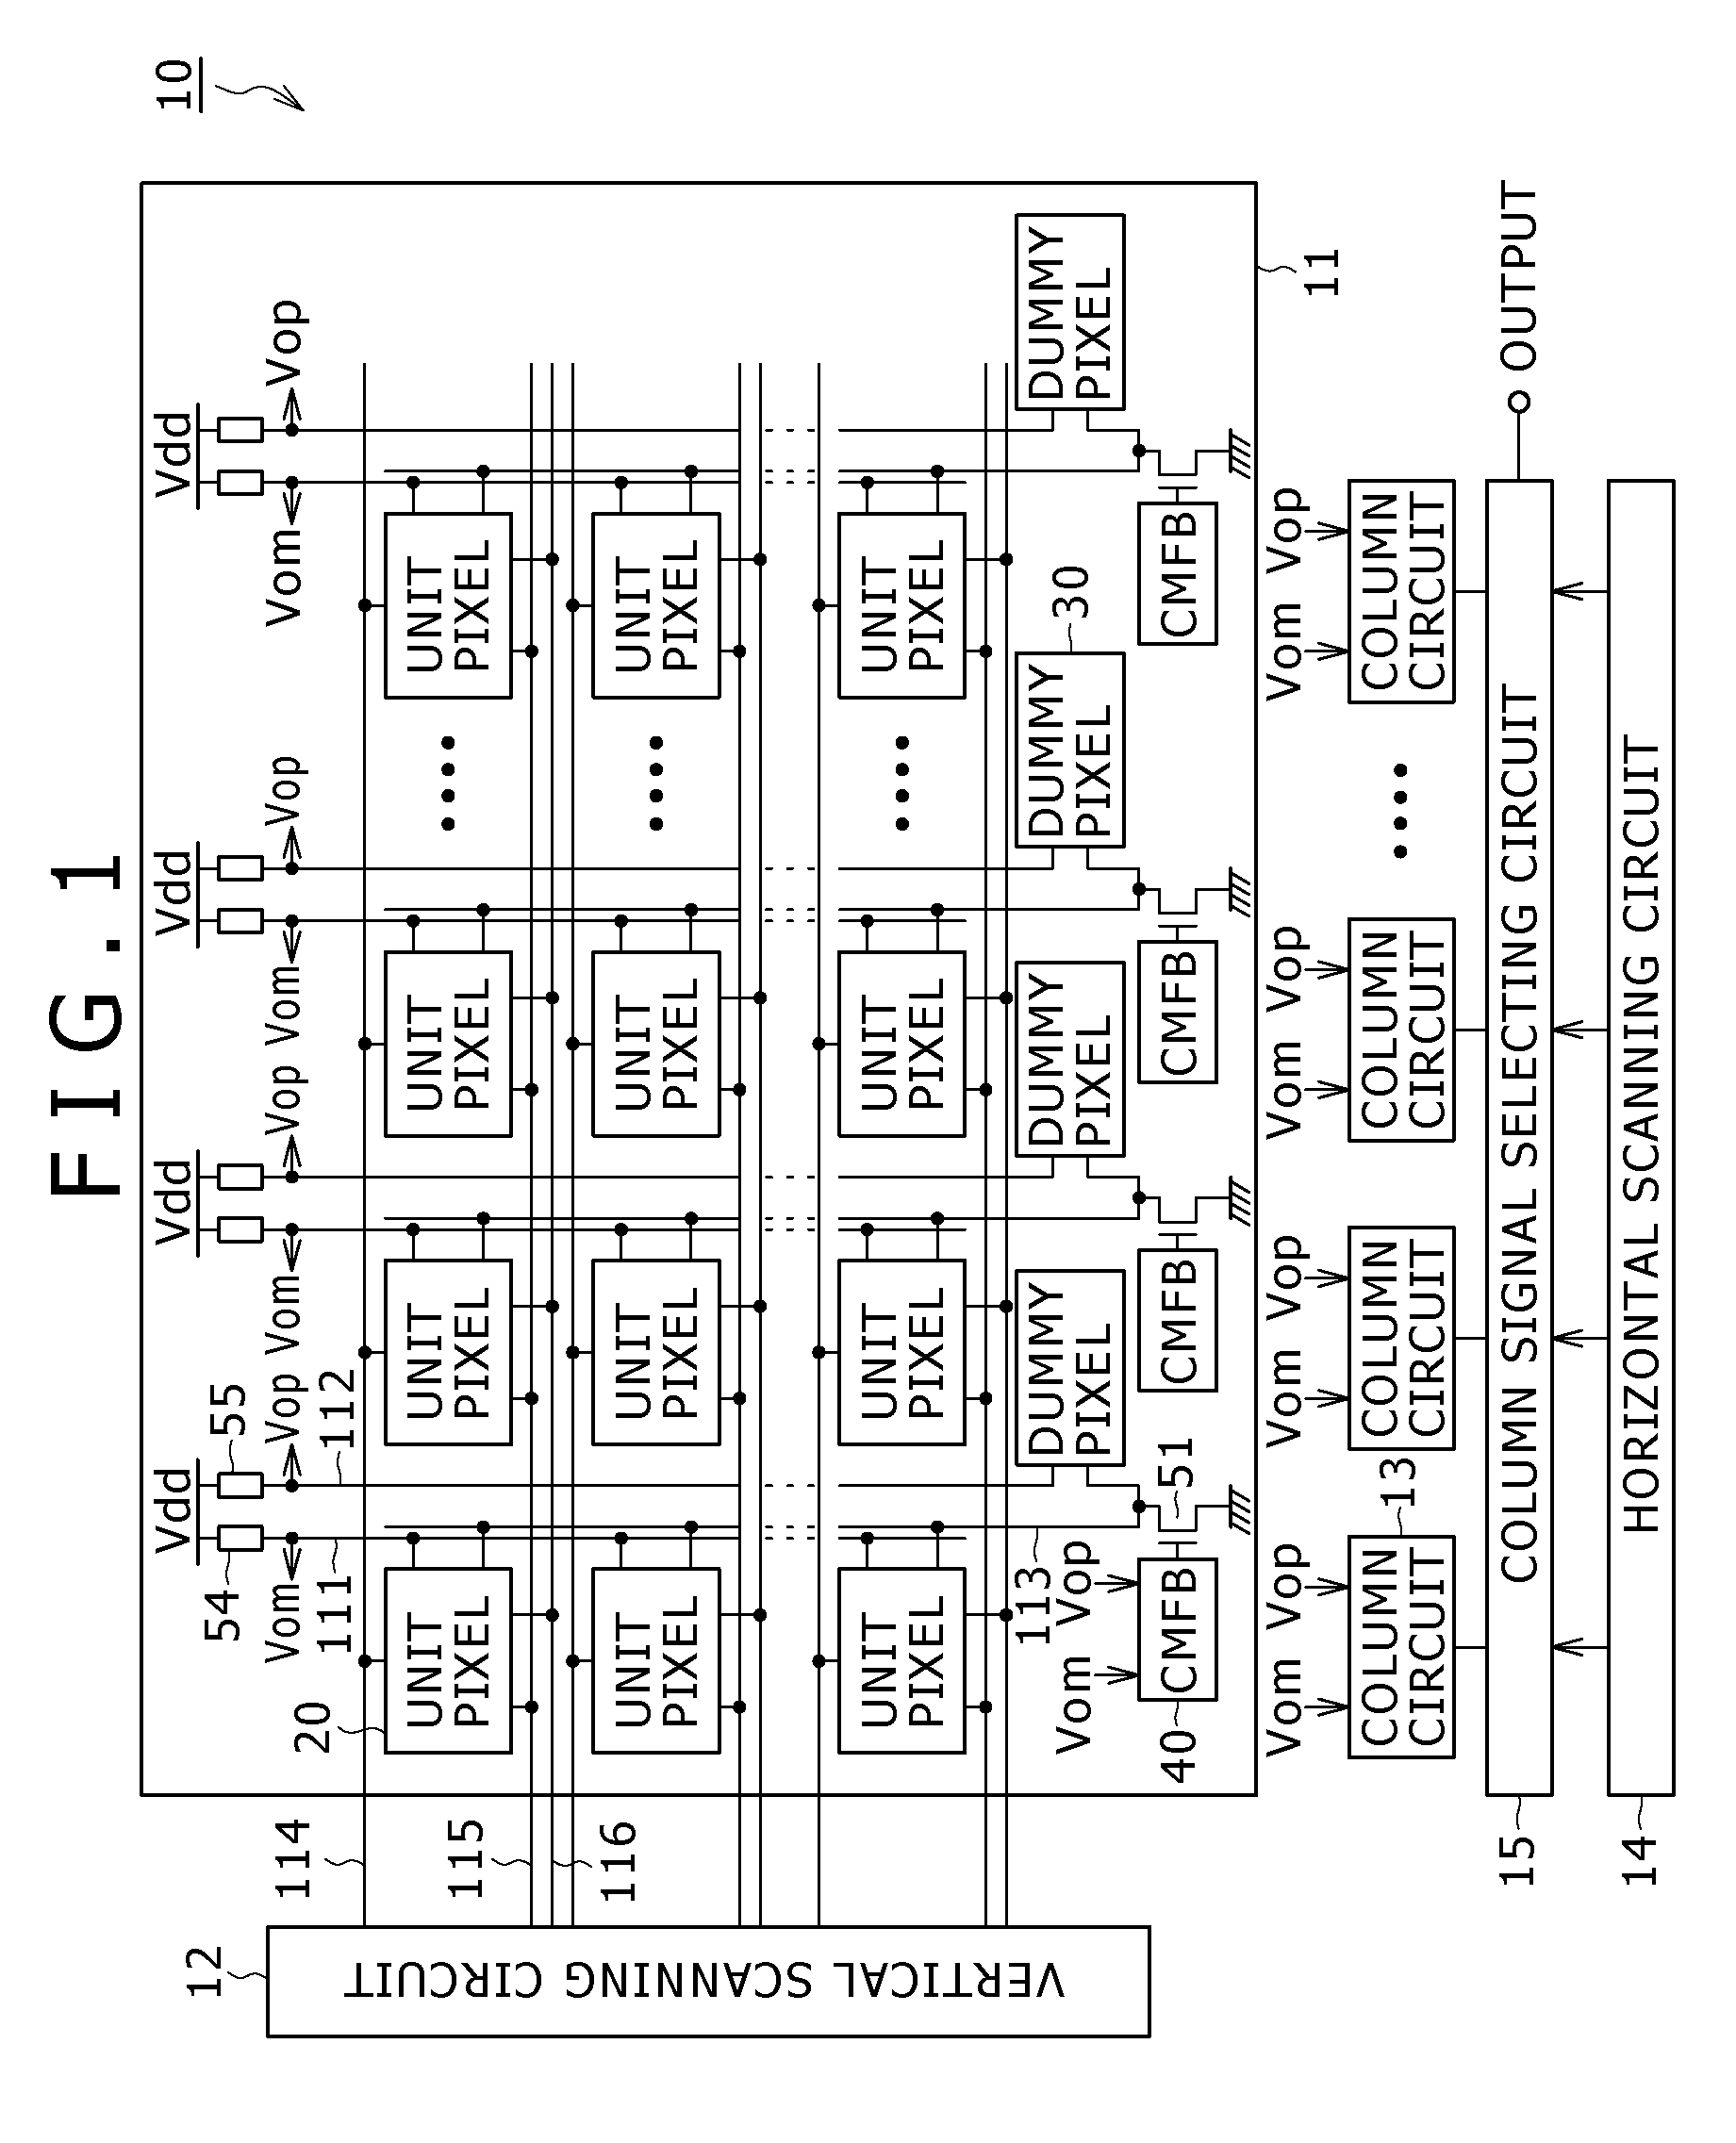 Solid-state image pickup device, a method of driving the same, a signal processing method for the same, and image pickup apparatus